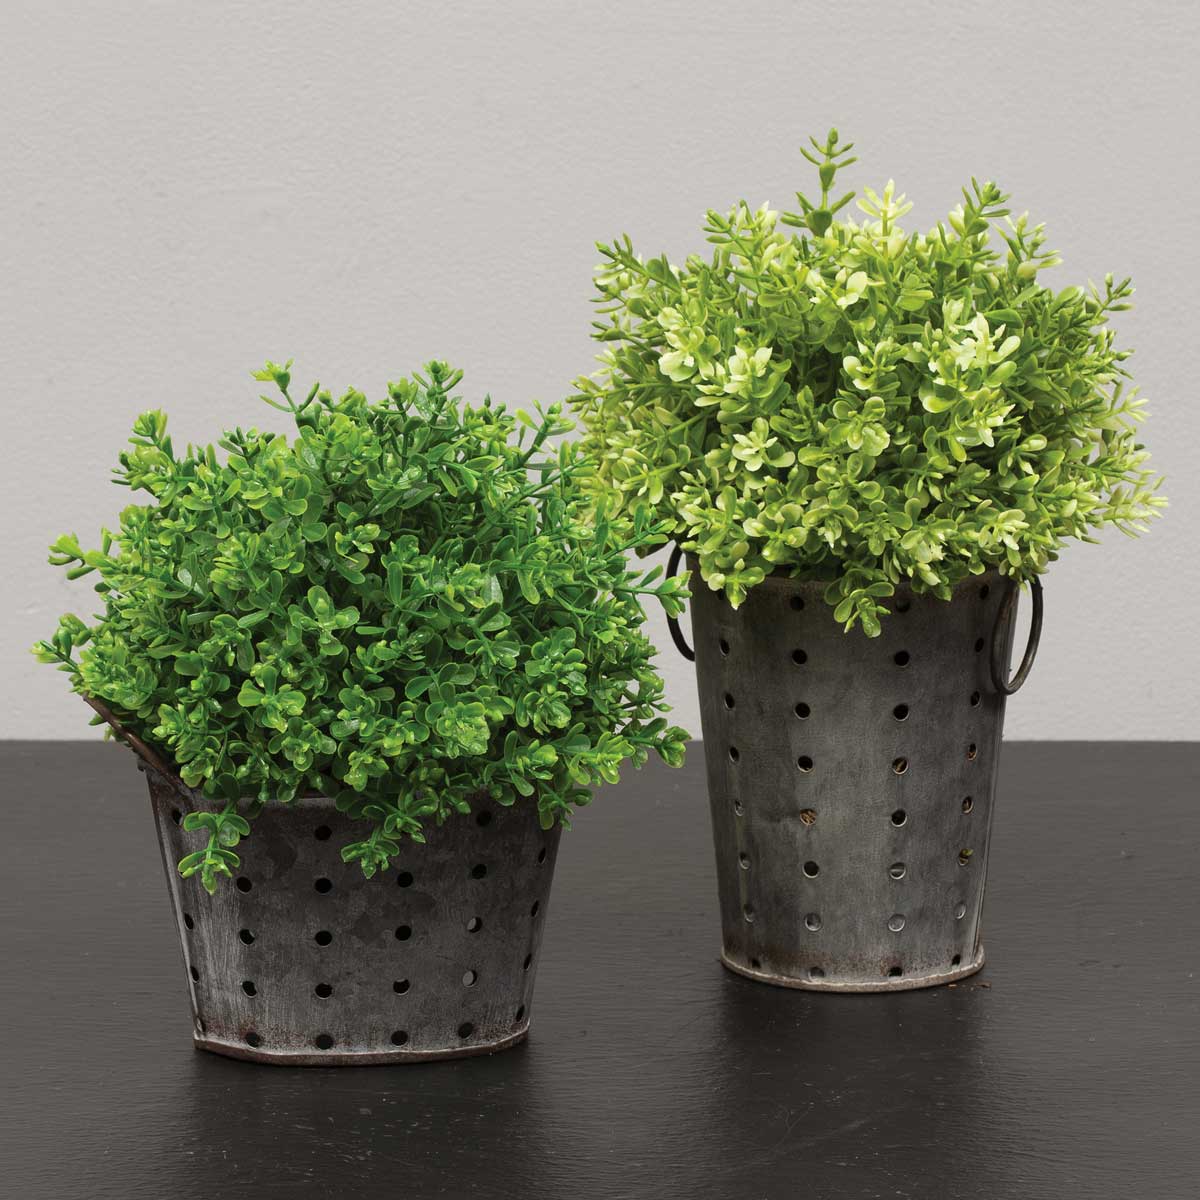 BALL DOME BOXWOOD DARK GREEN 6IN X 8IN - Click Image to Close